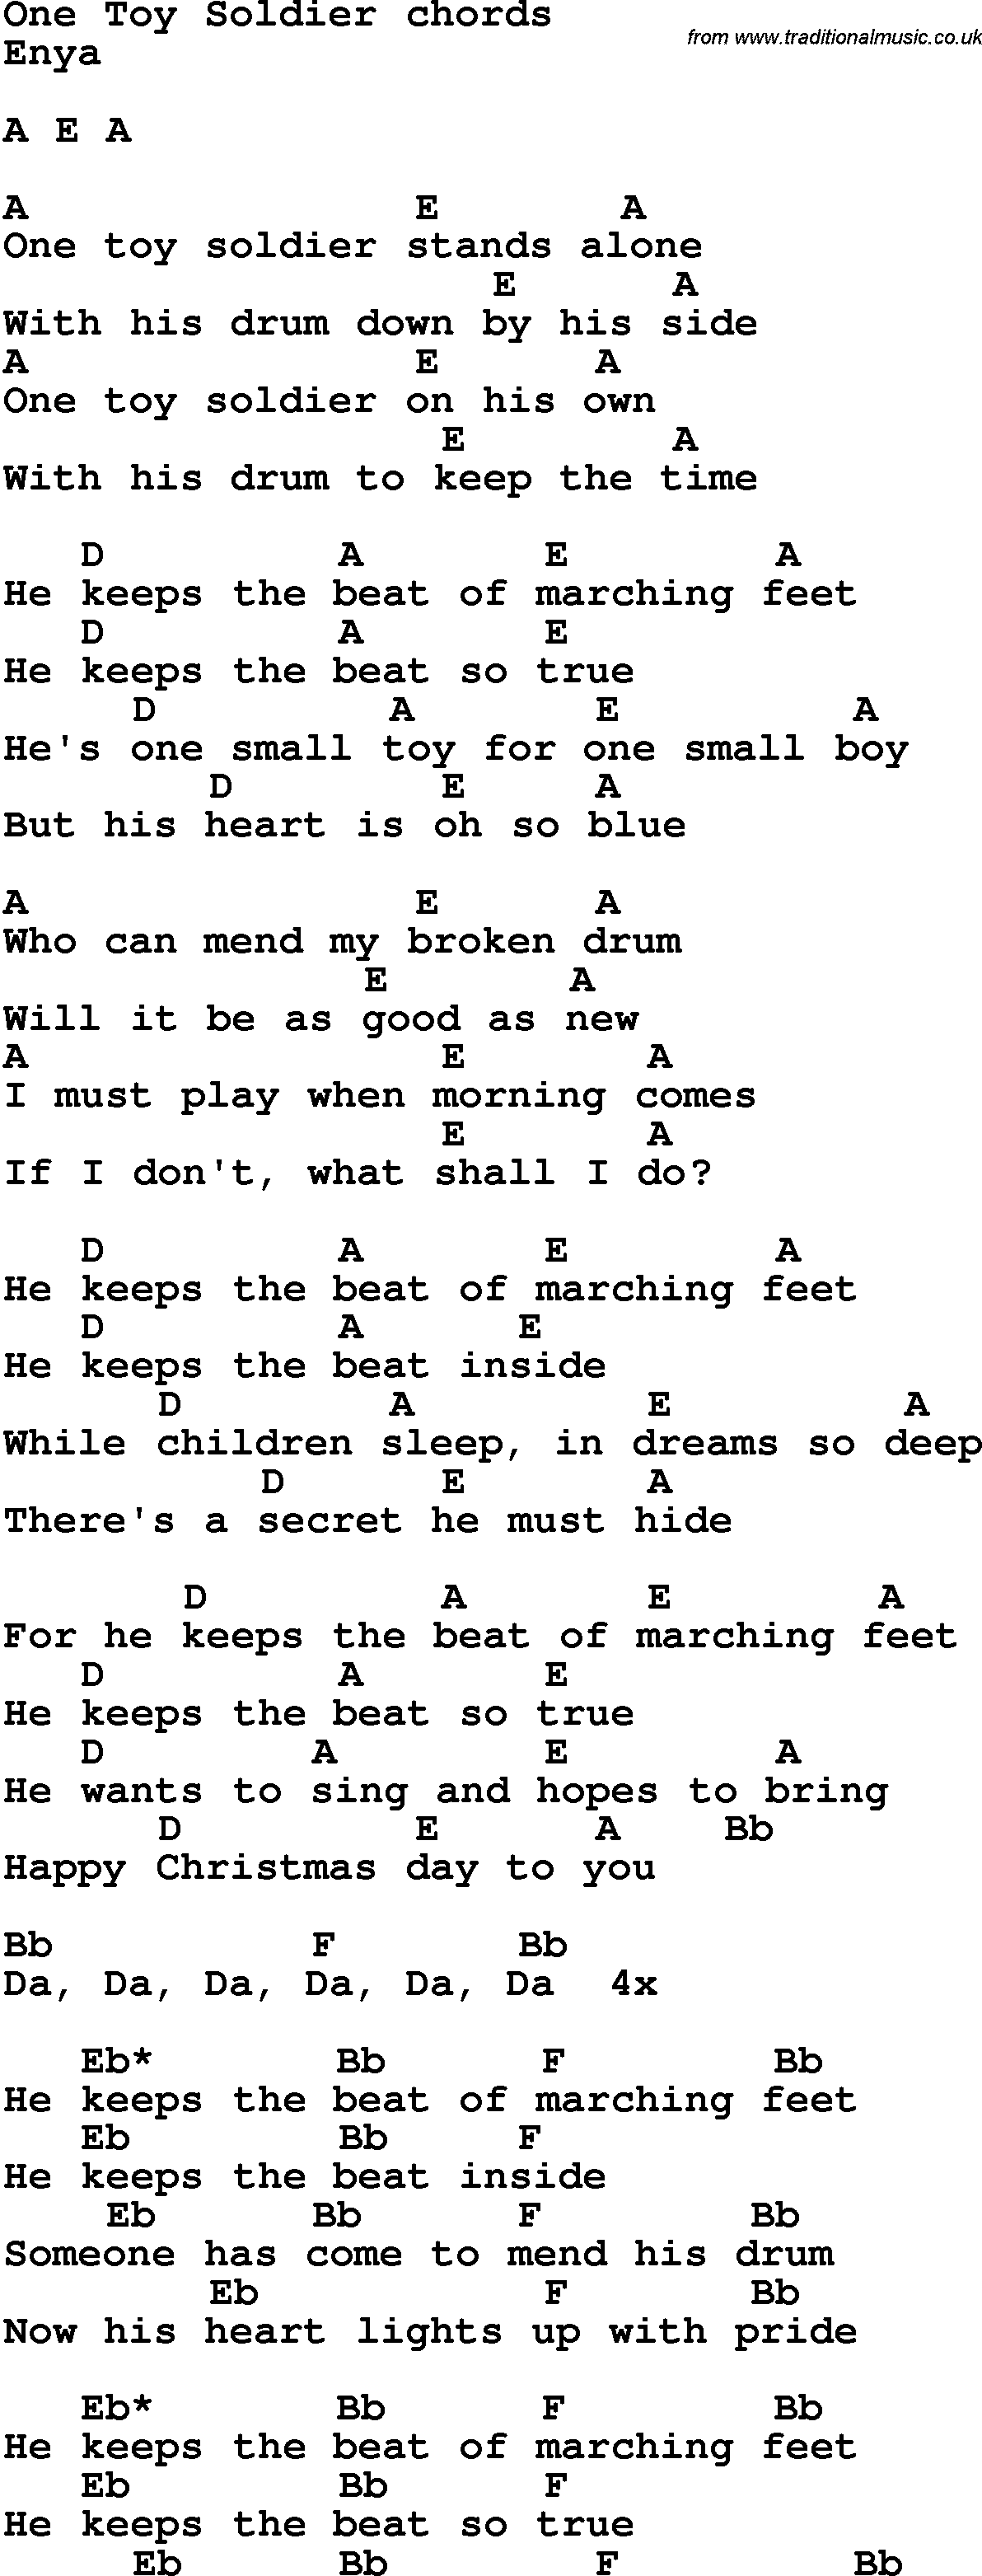 Song Lyrics with guitar chords for One Toy Soldier